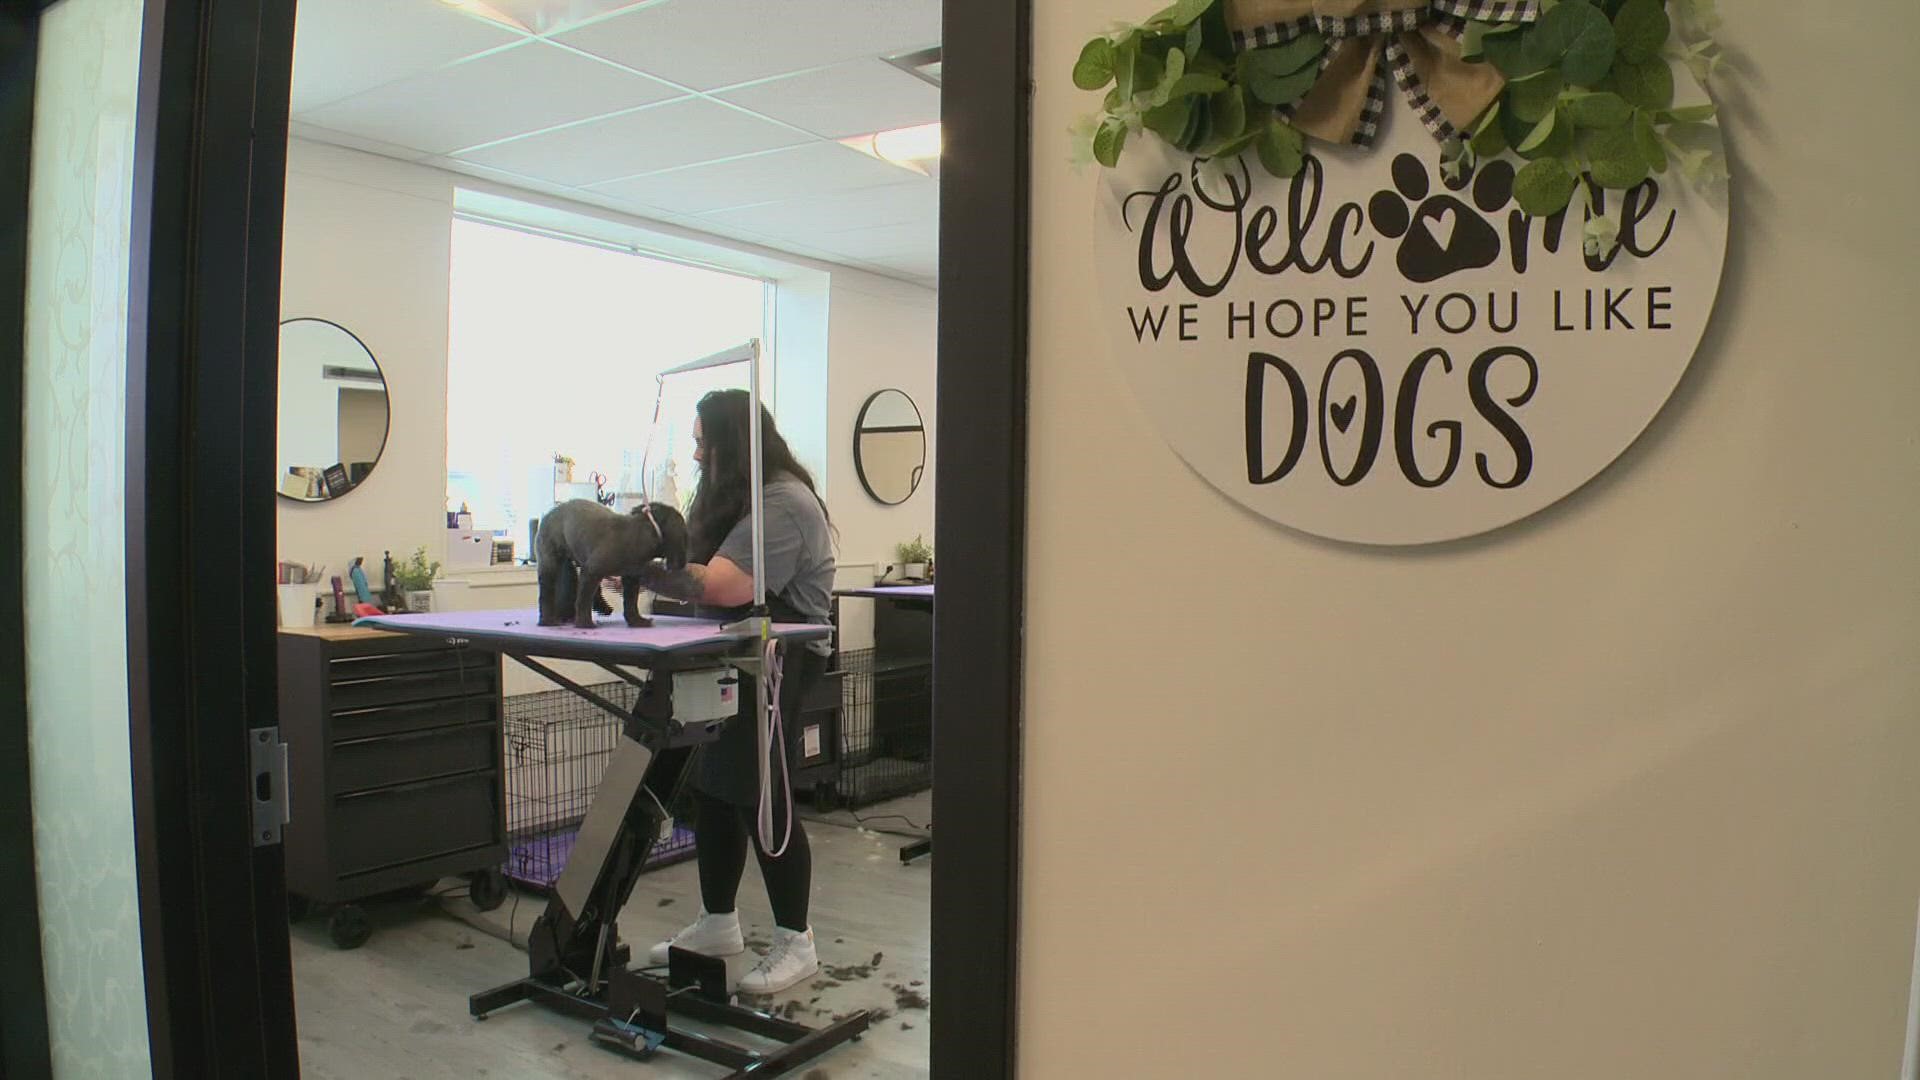 Adore Dog Salon got help from a nonprofit. If successful, those funds will go back to the nonprofit to help the next startup.